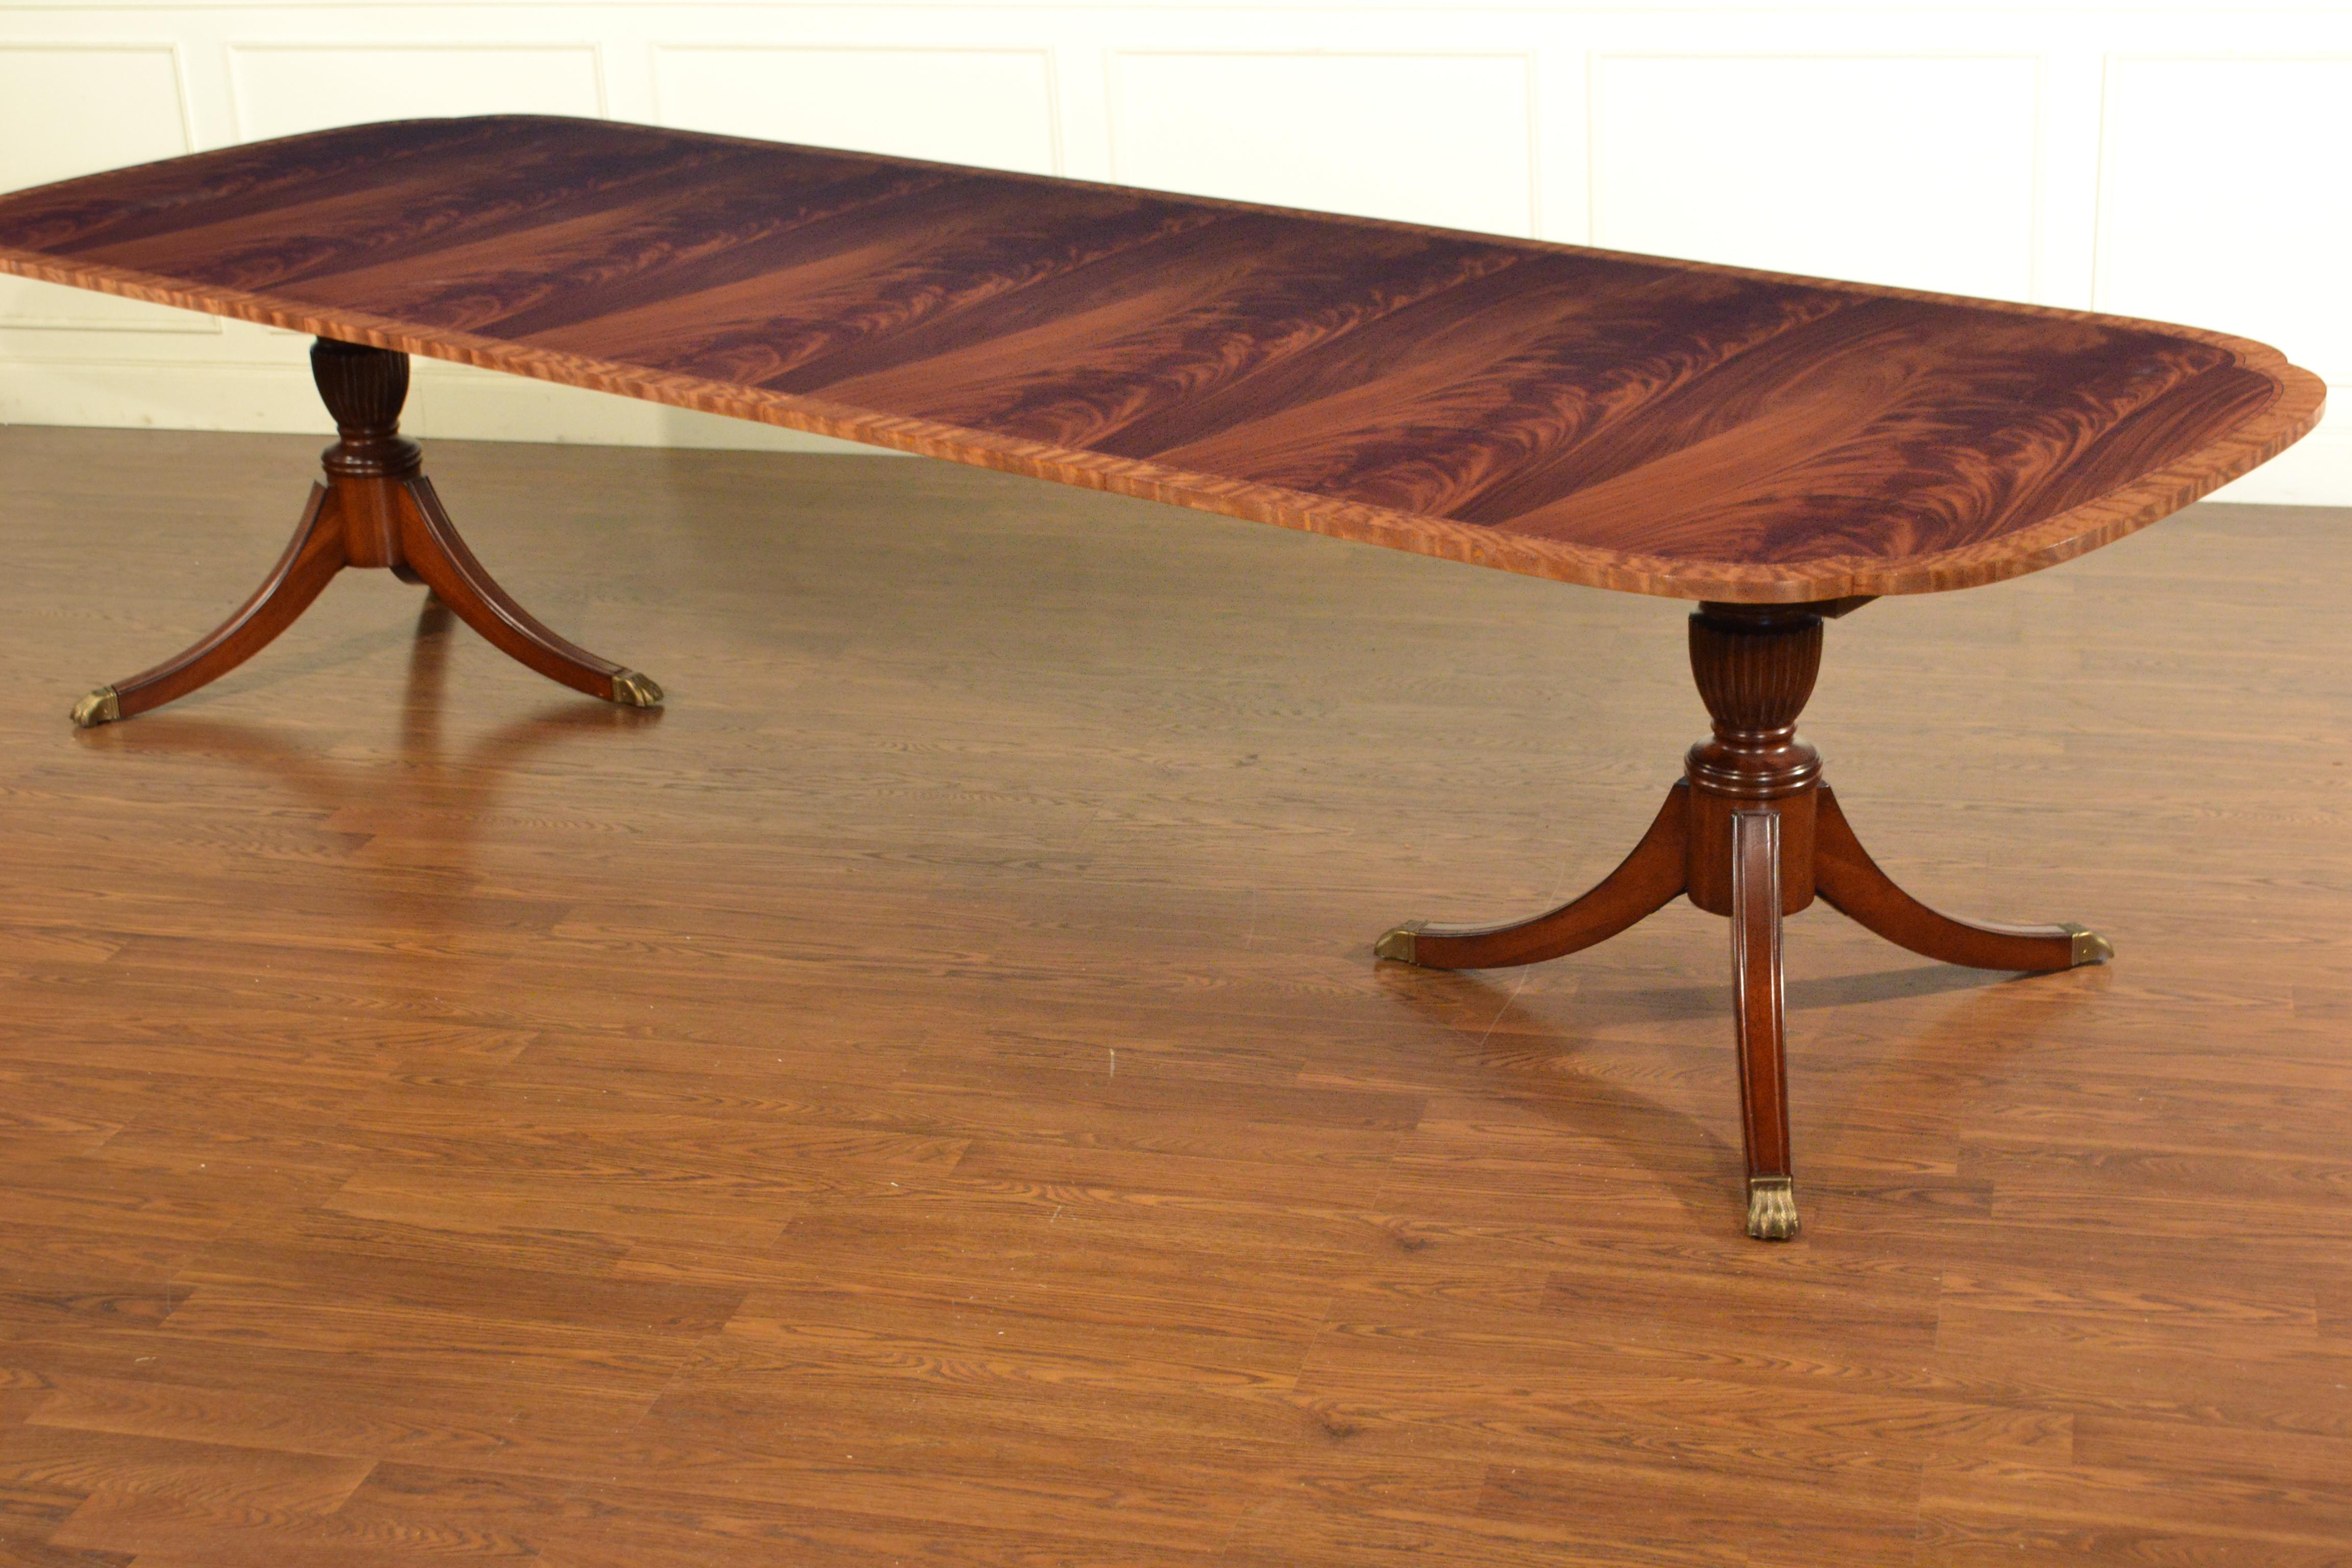 This is a made-to-order large traditional mahogany dining table made in the Leighton Hall shop. The highlight of this table is the elegantly shaped scalloped corners. It features a field of slip-matched swirly crotch mahogany from West Africa and a